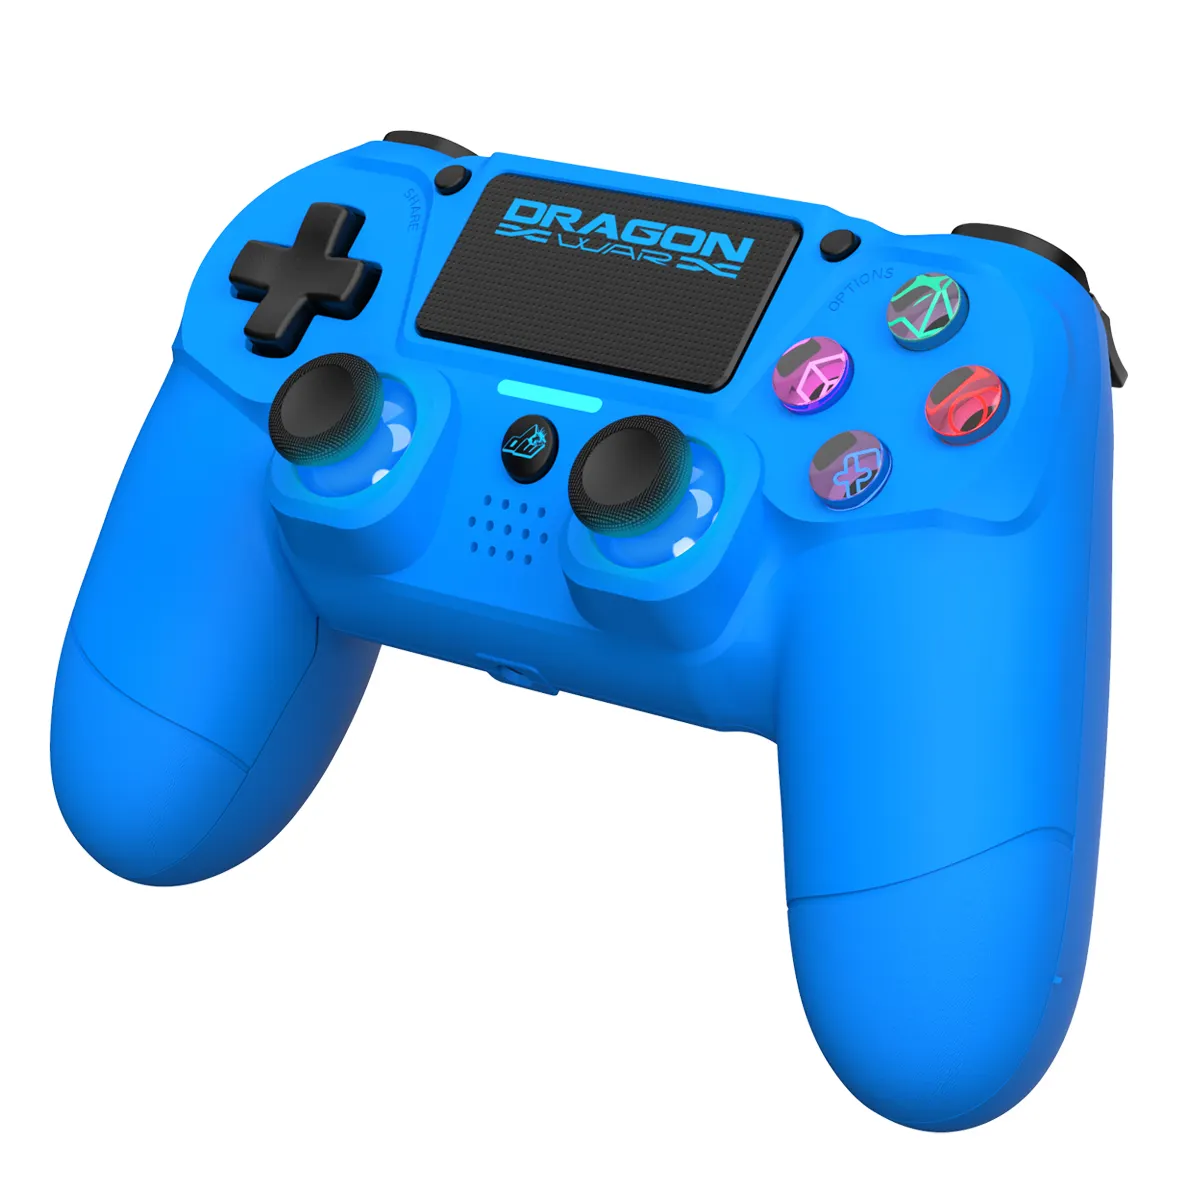 Dragon War P S4 wireless blue tooth dual vibration speaker touch pad LED RGB light BT 5.0wireless game controller